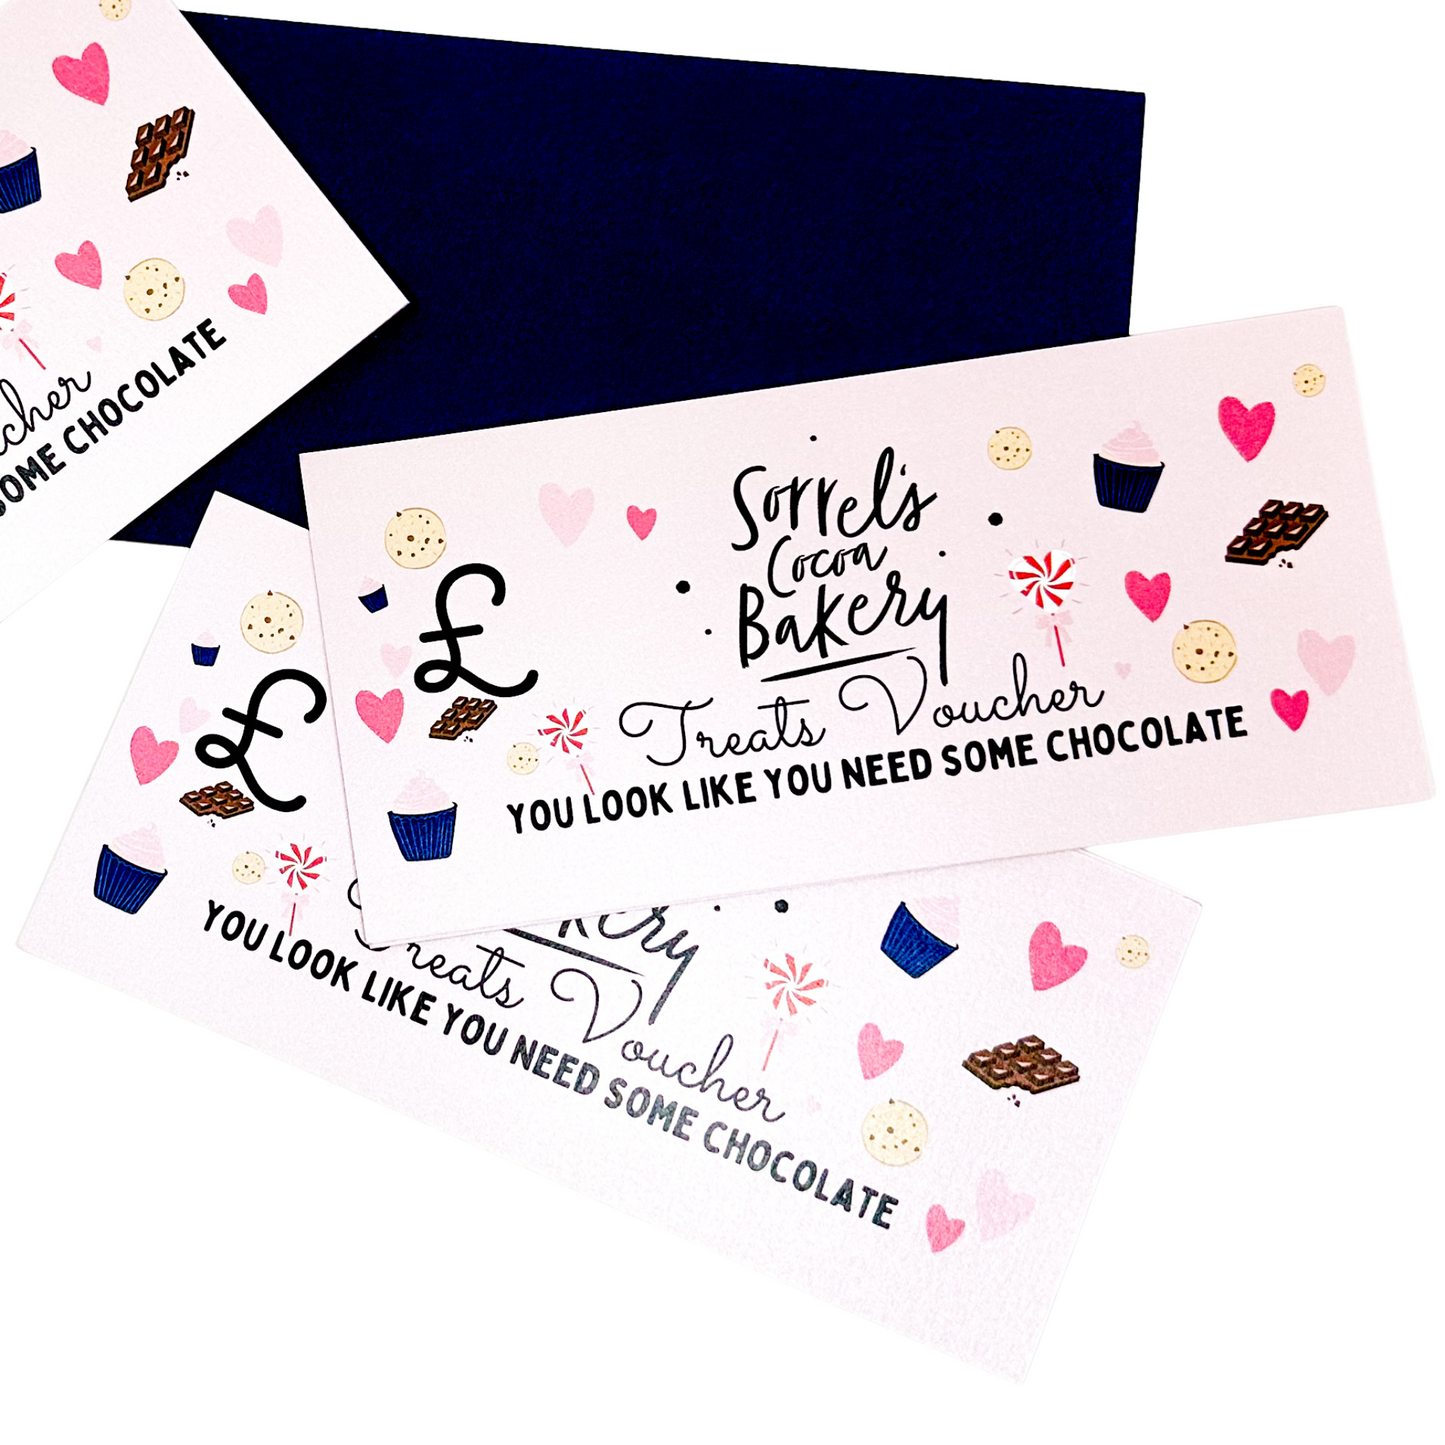 Gift Voucher for the Sheffield Shop